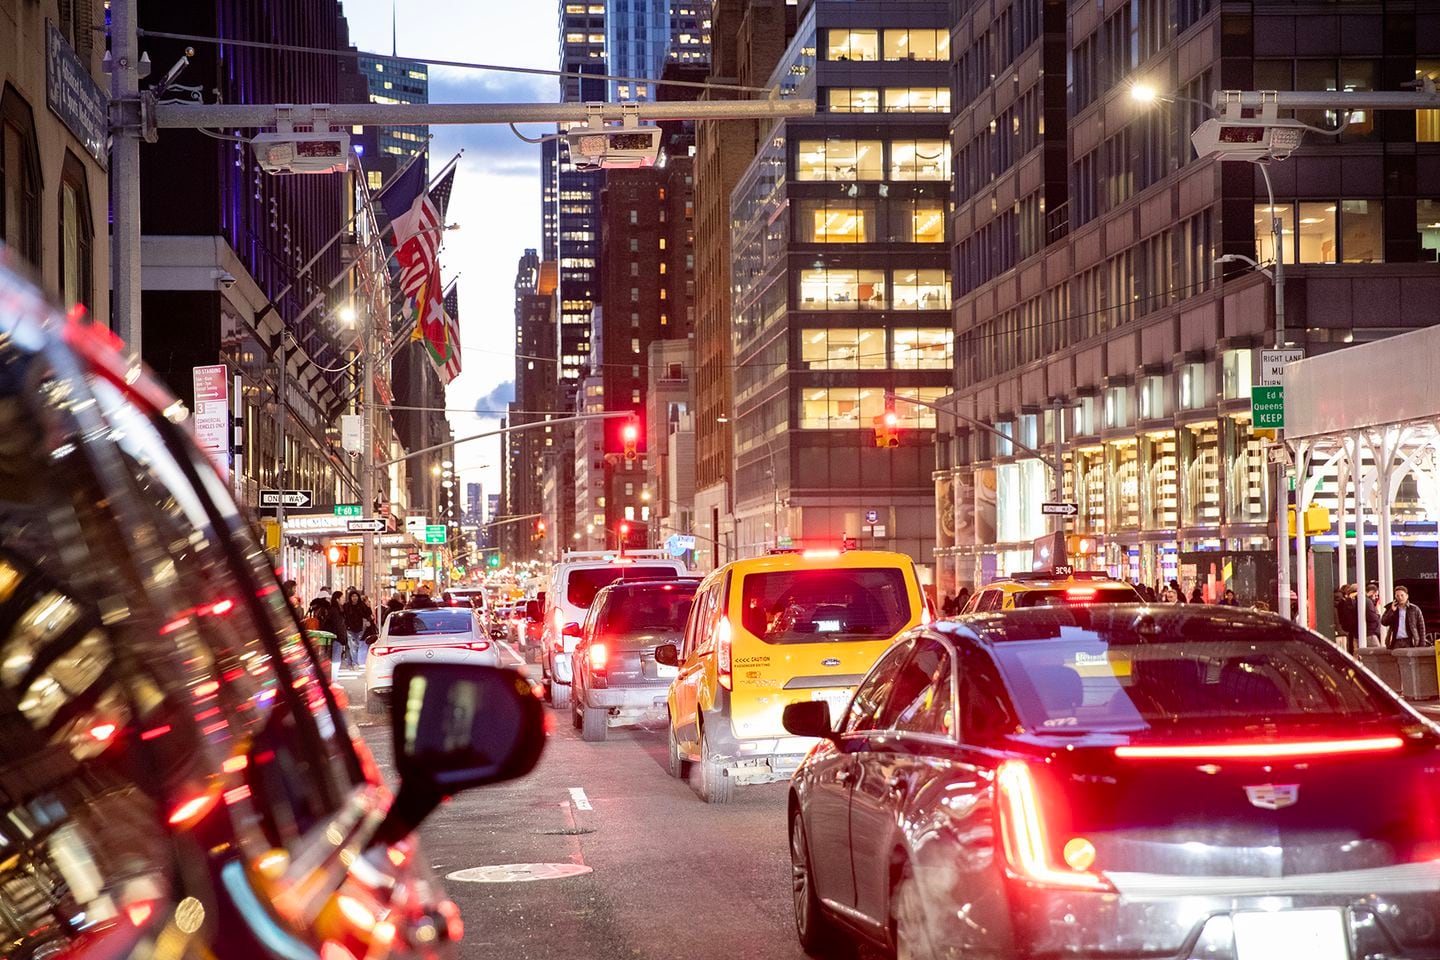 Congestion pricing plate readers are installed over Lexington Avenue on December 18, 2023 in New York City. Cars entering Manhattan south of 60th Street during peak periods could be charged a toll of up to 15 dollars per day.